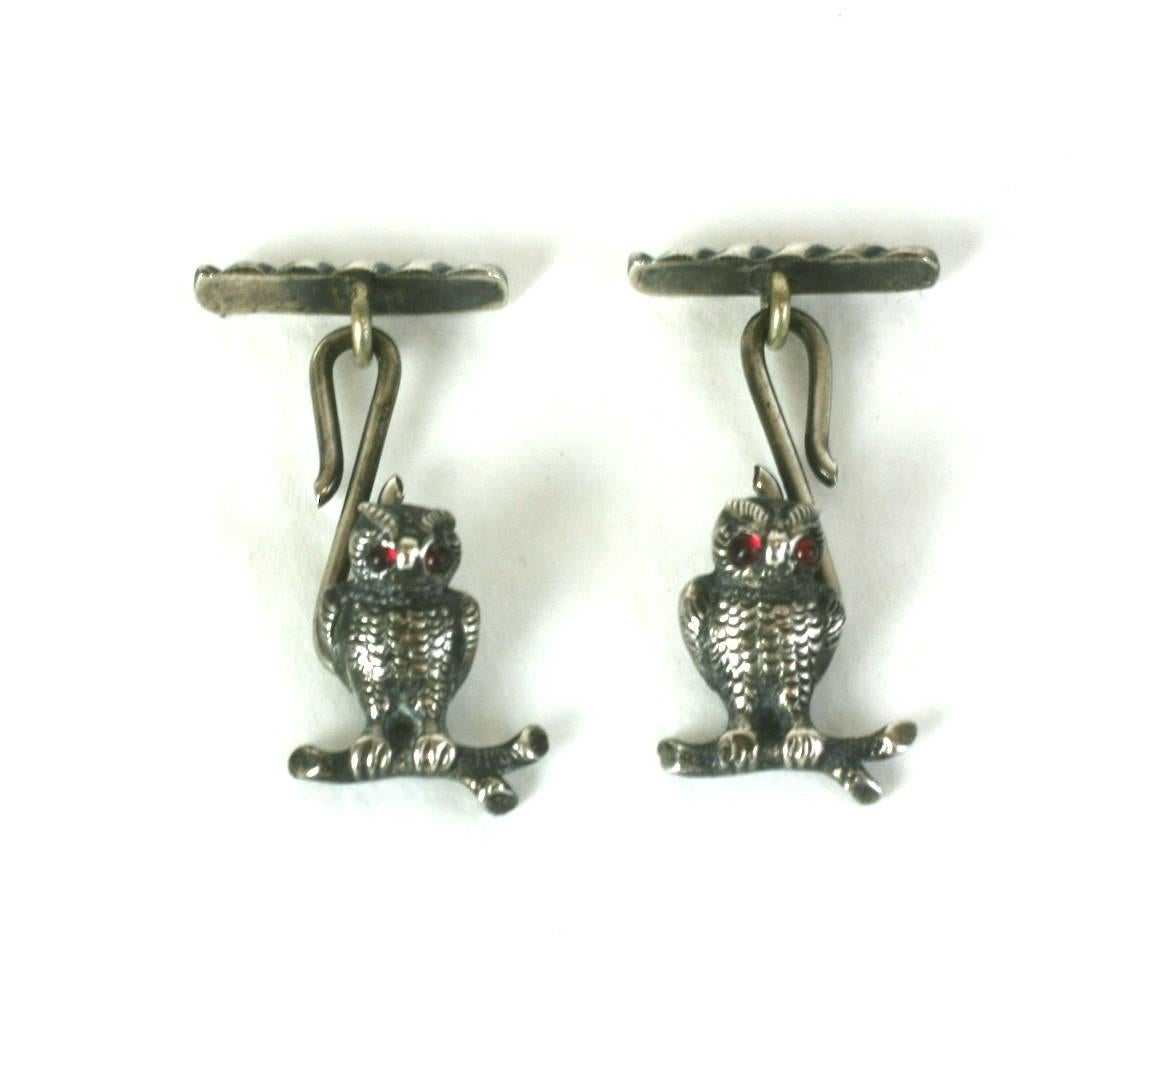 Charming Victorian Wise Owl cufflinks of sterling silver and garnet cabochons eyes. 